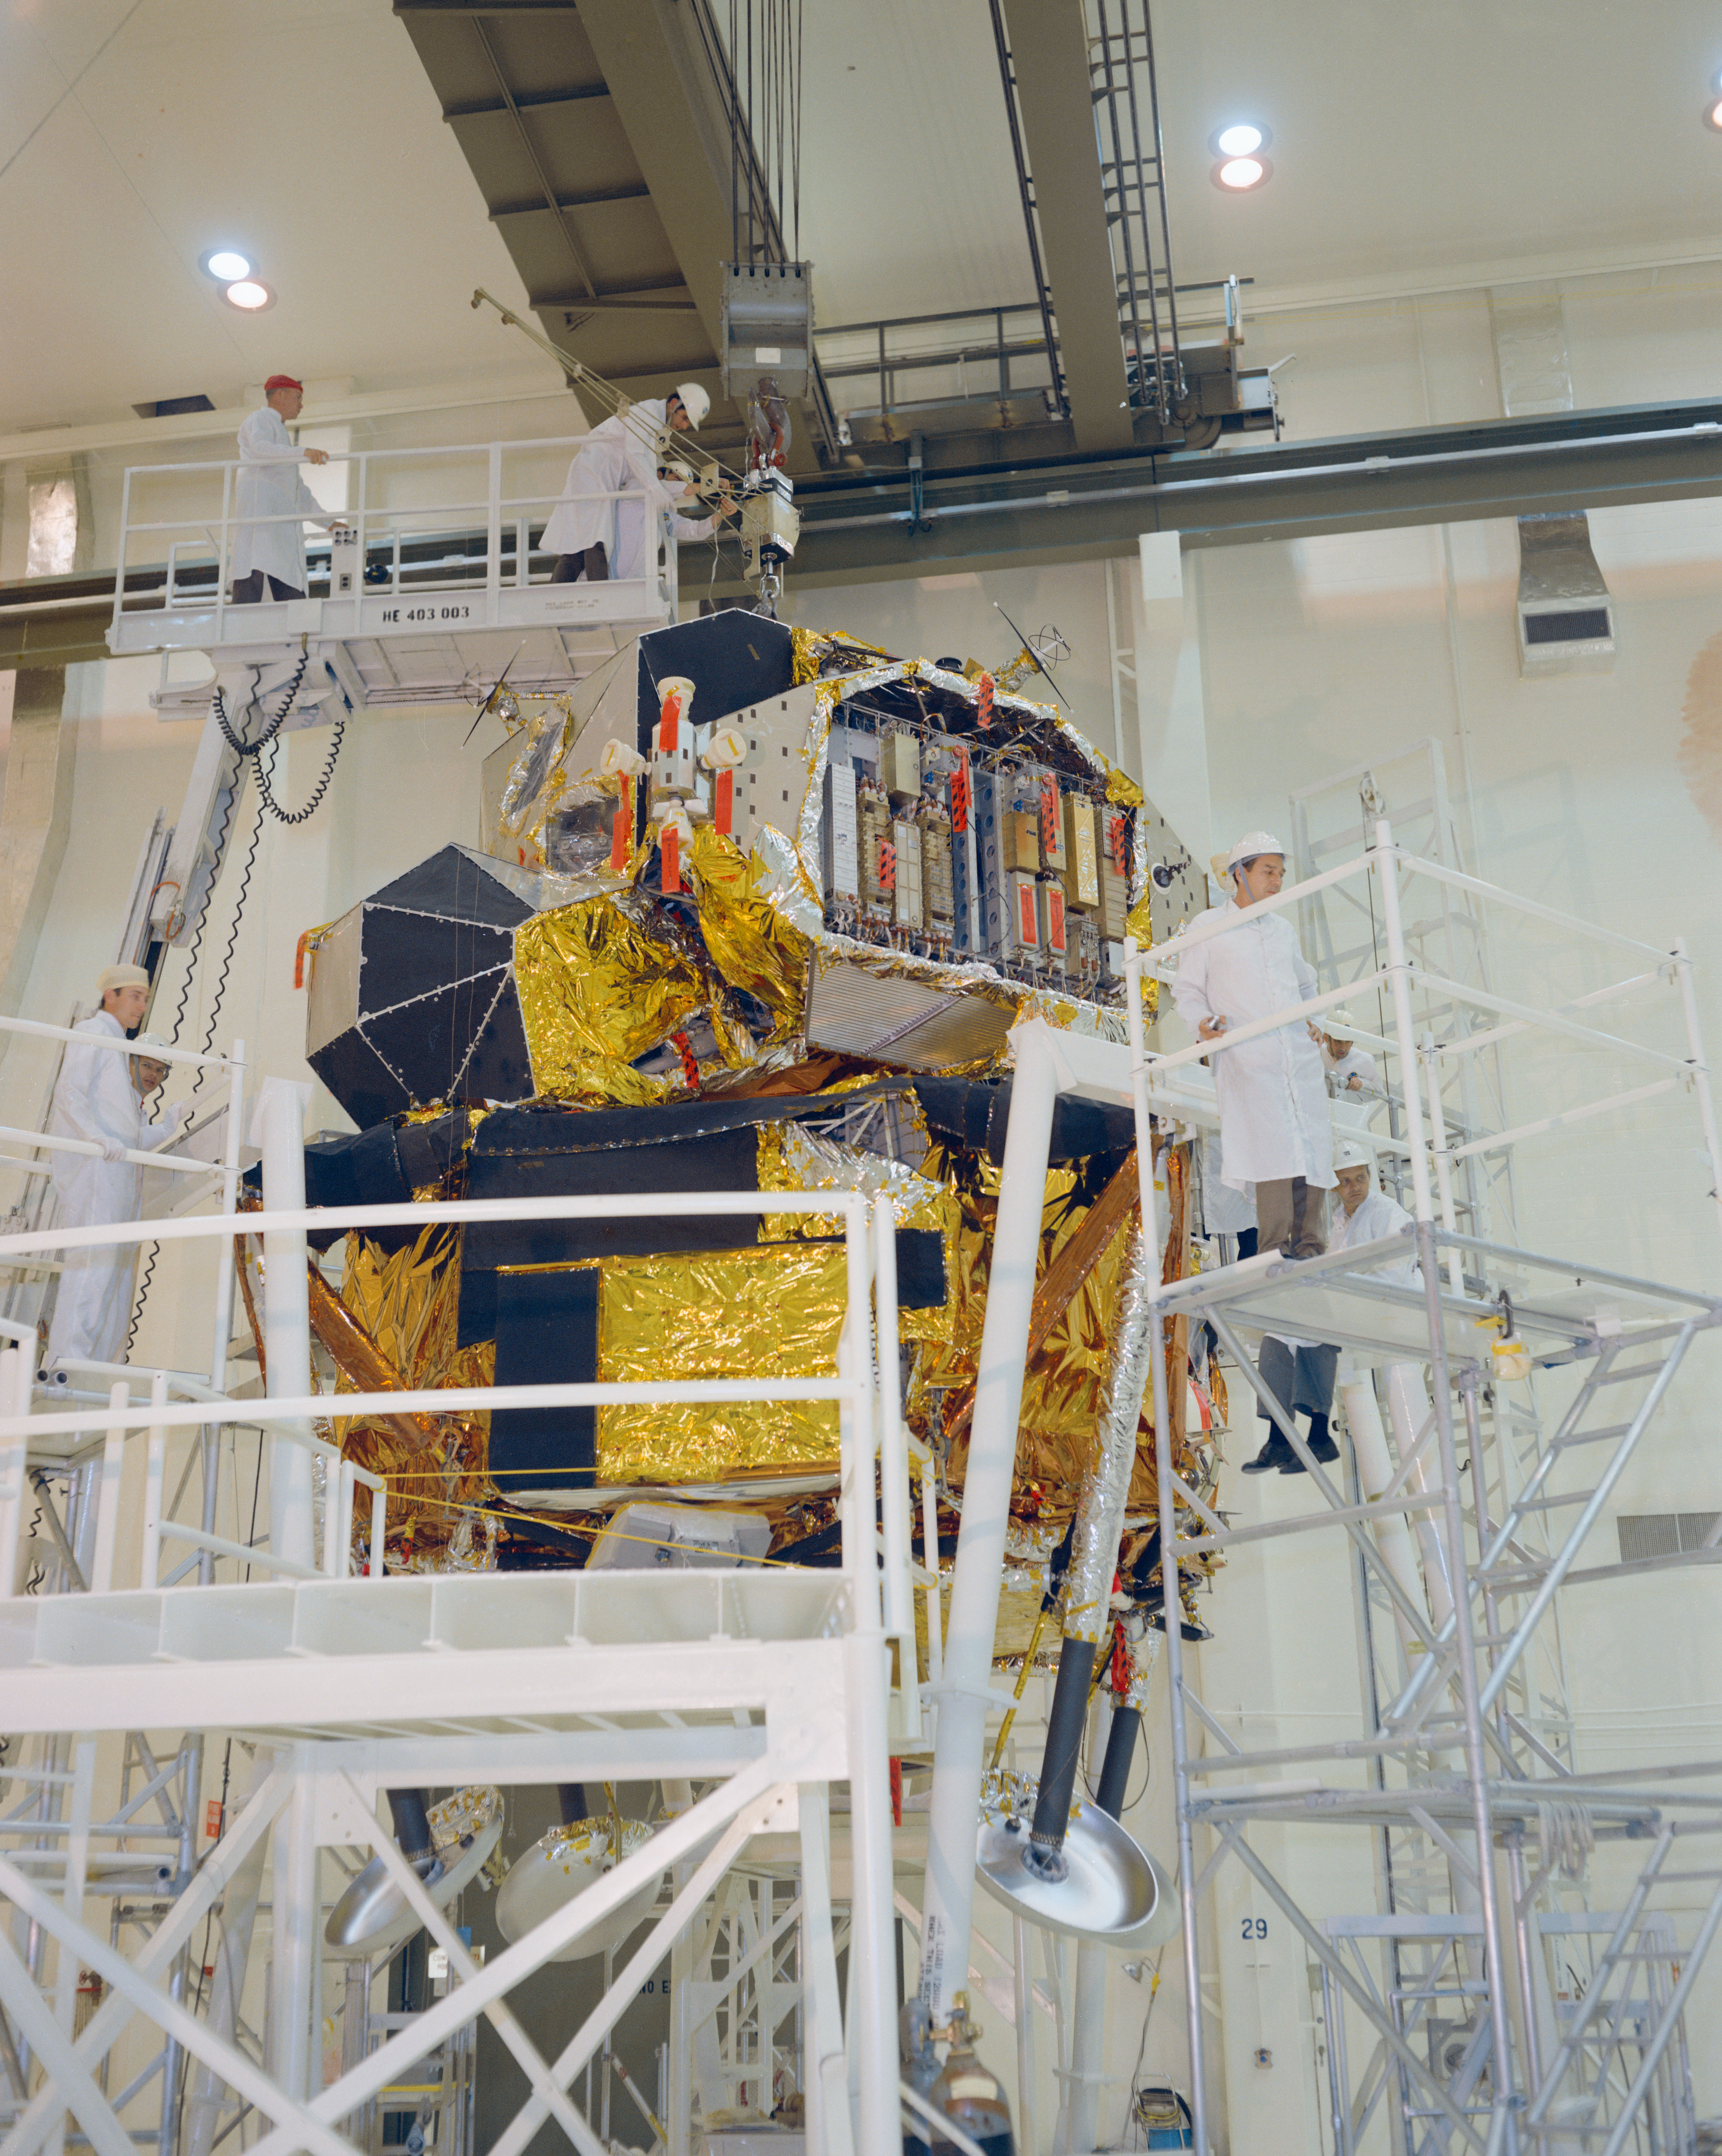 In the Manned Spacecraft Operations Building (MSOB) at NASA’s Kennedy Space Center (KSC) in Florida, workers complete attaching the landing legs to the Apollo 11 Lunar Module (LM)